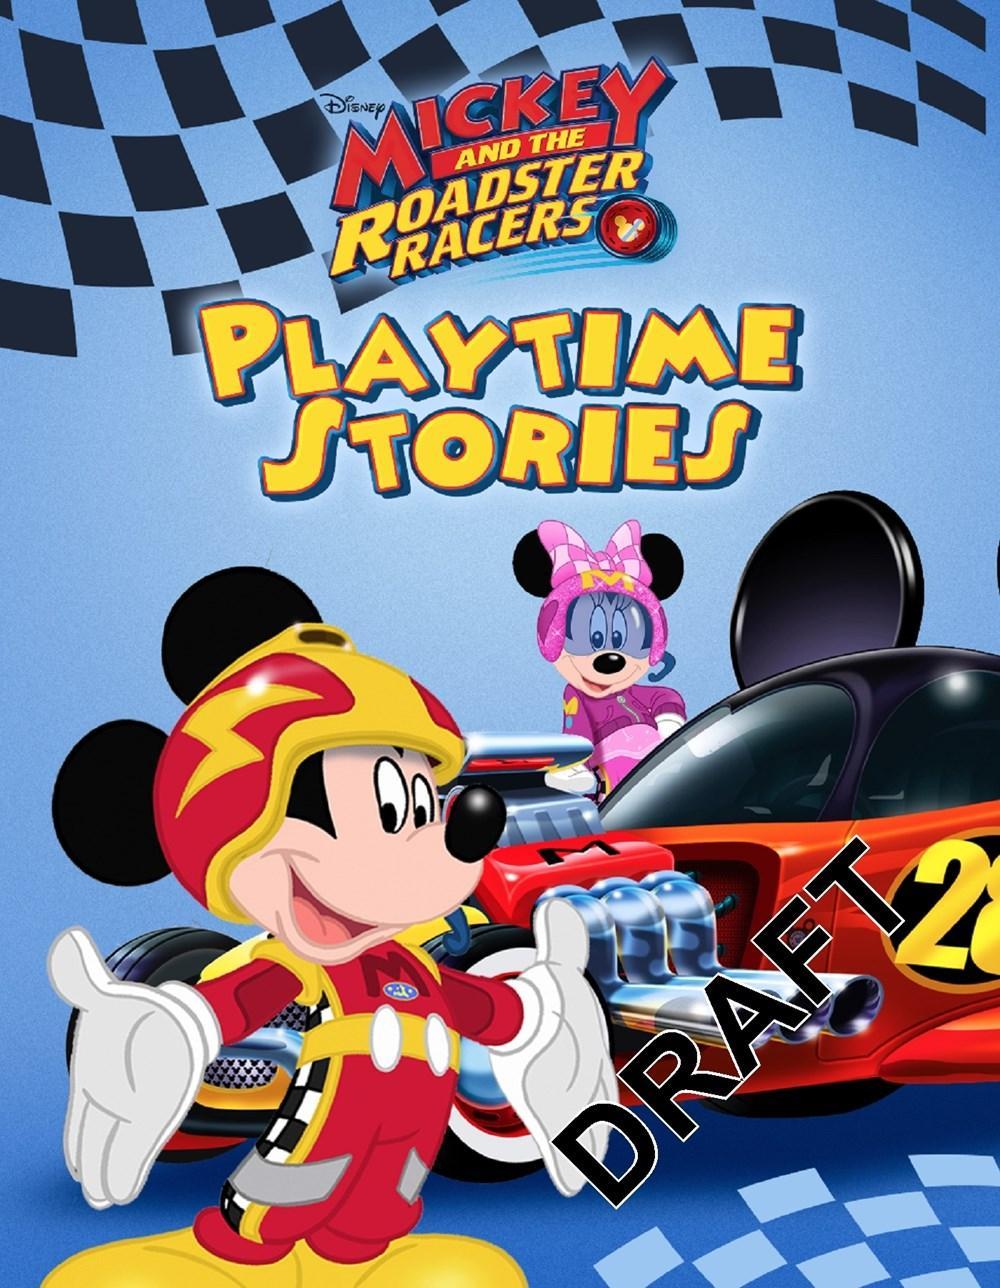 EDDA USA MAY 2017 Mickey and the Roadster Racers Playtime Stories Create your own stories! Playtime Stories are great for every child that wants to bring their favorite characters to life!